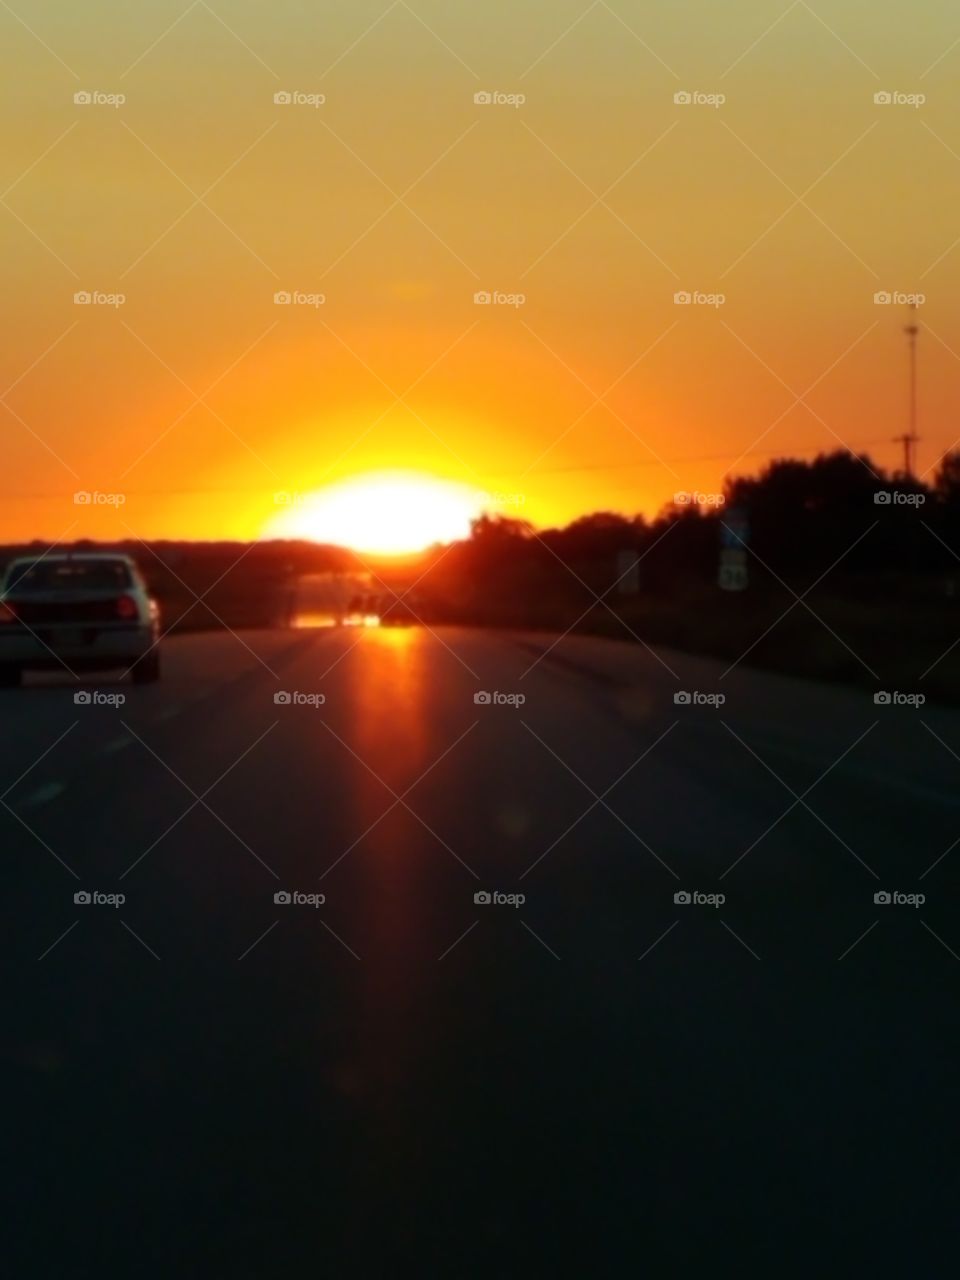 Sunset on the Highway